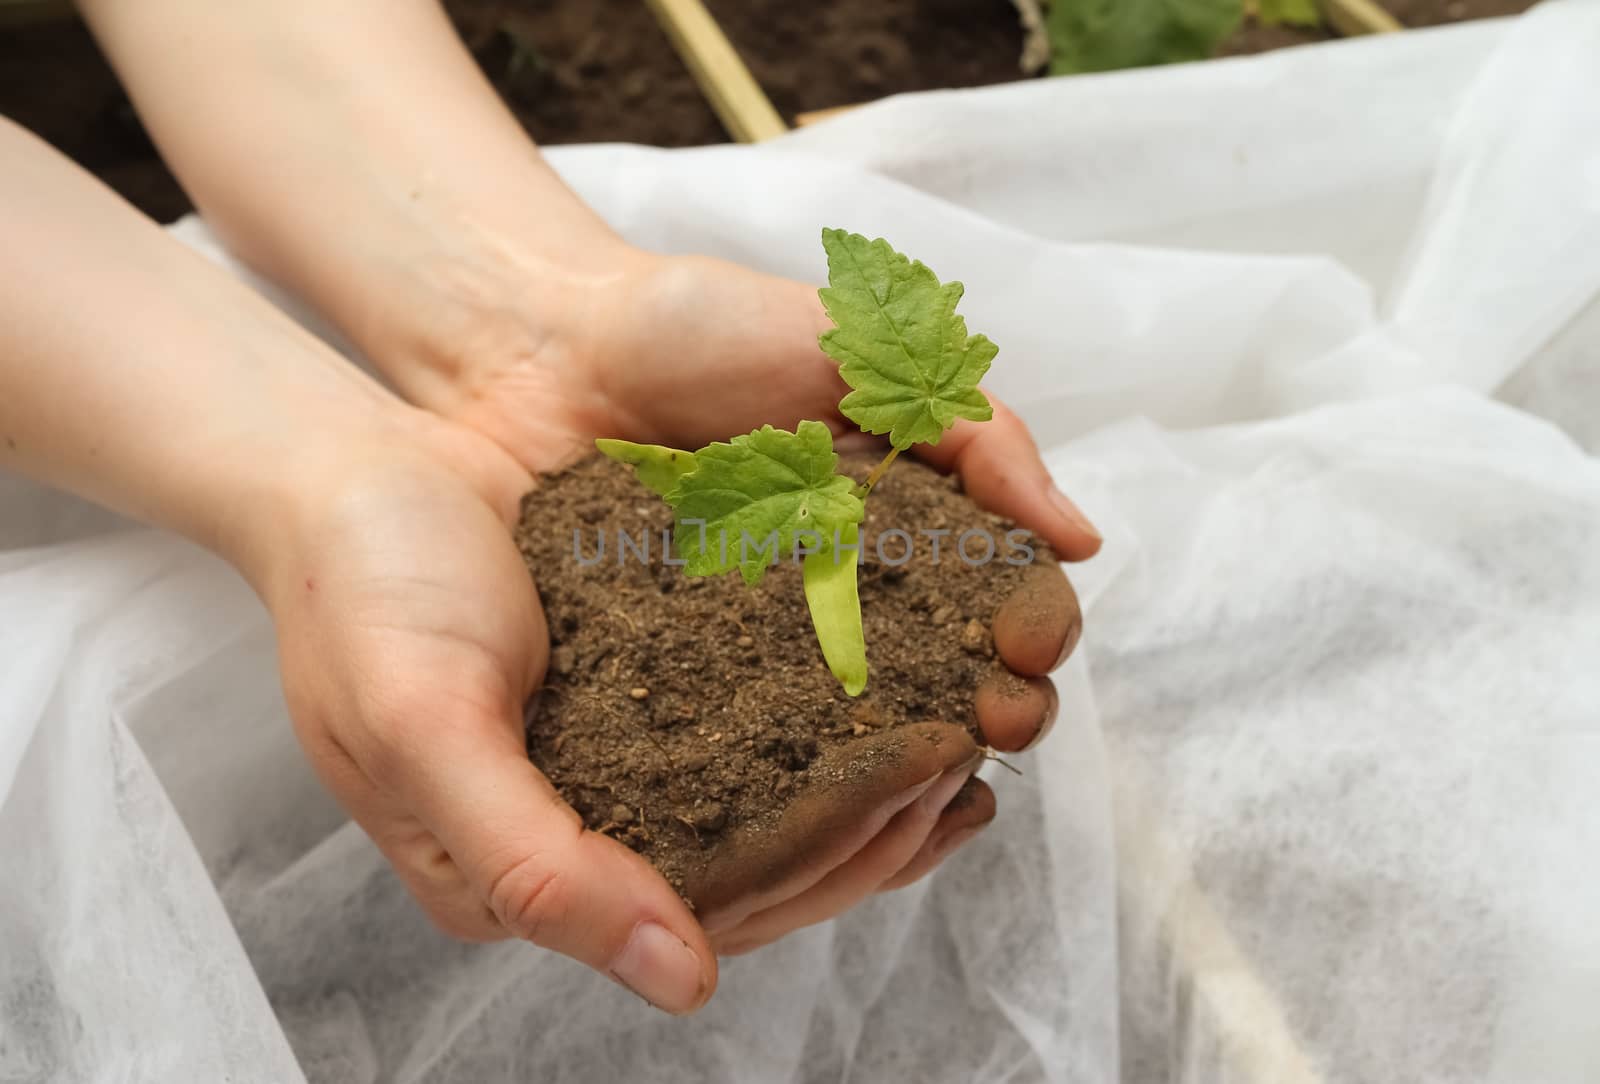 Human hands of a young woman holding green small plant seedling. by MP_foto71